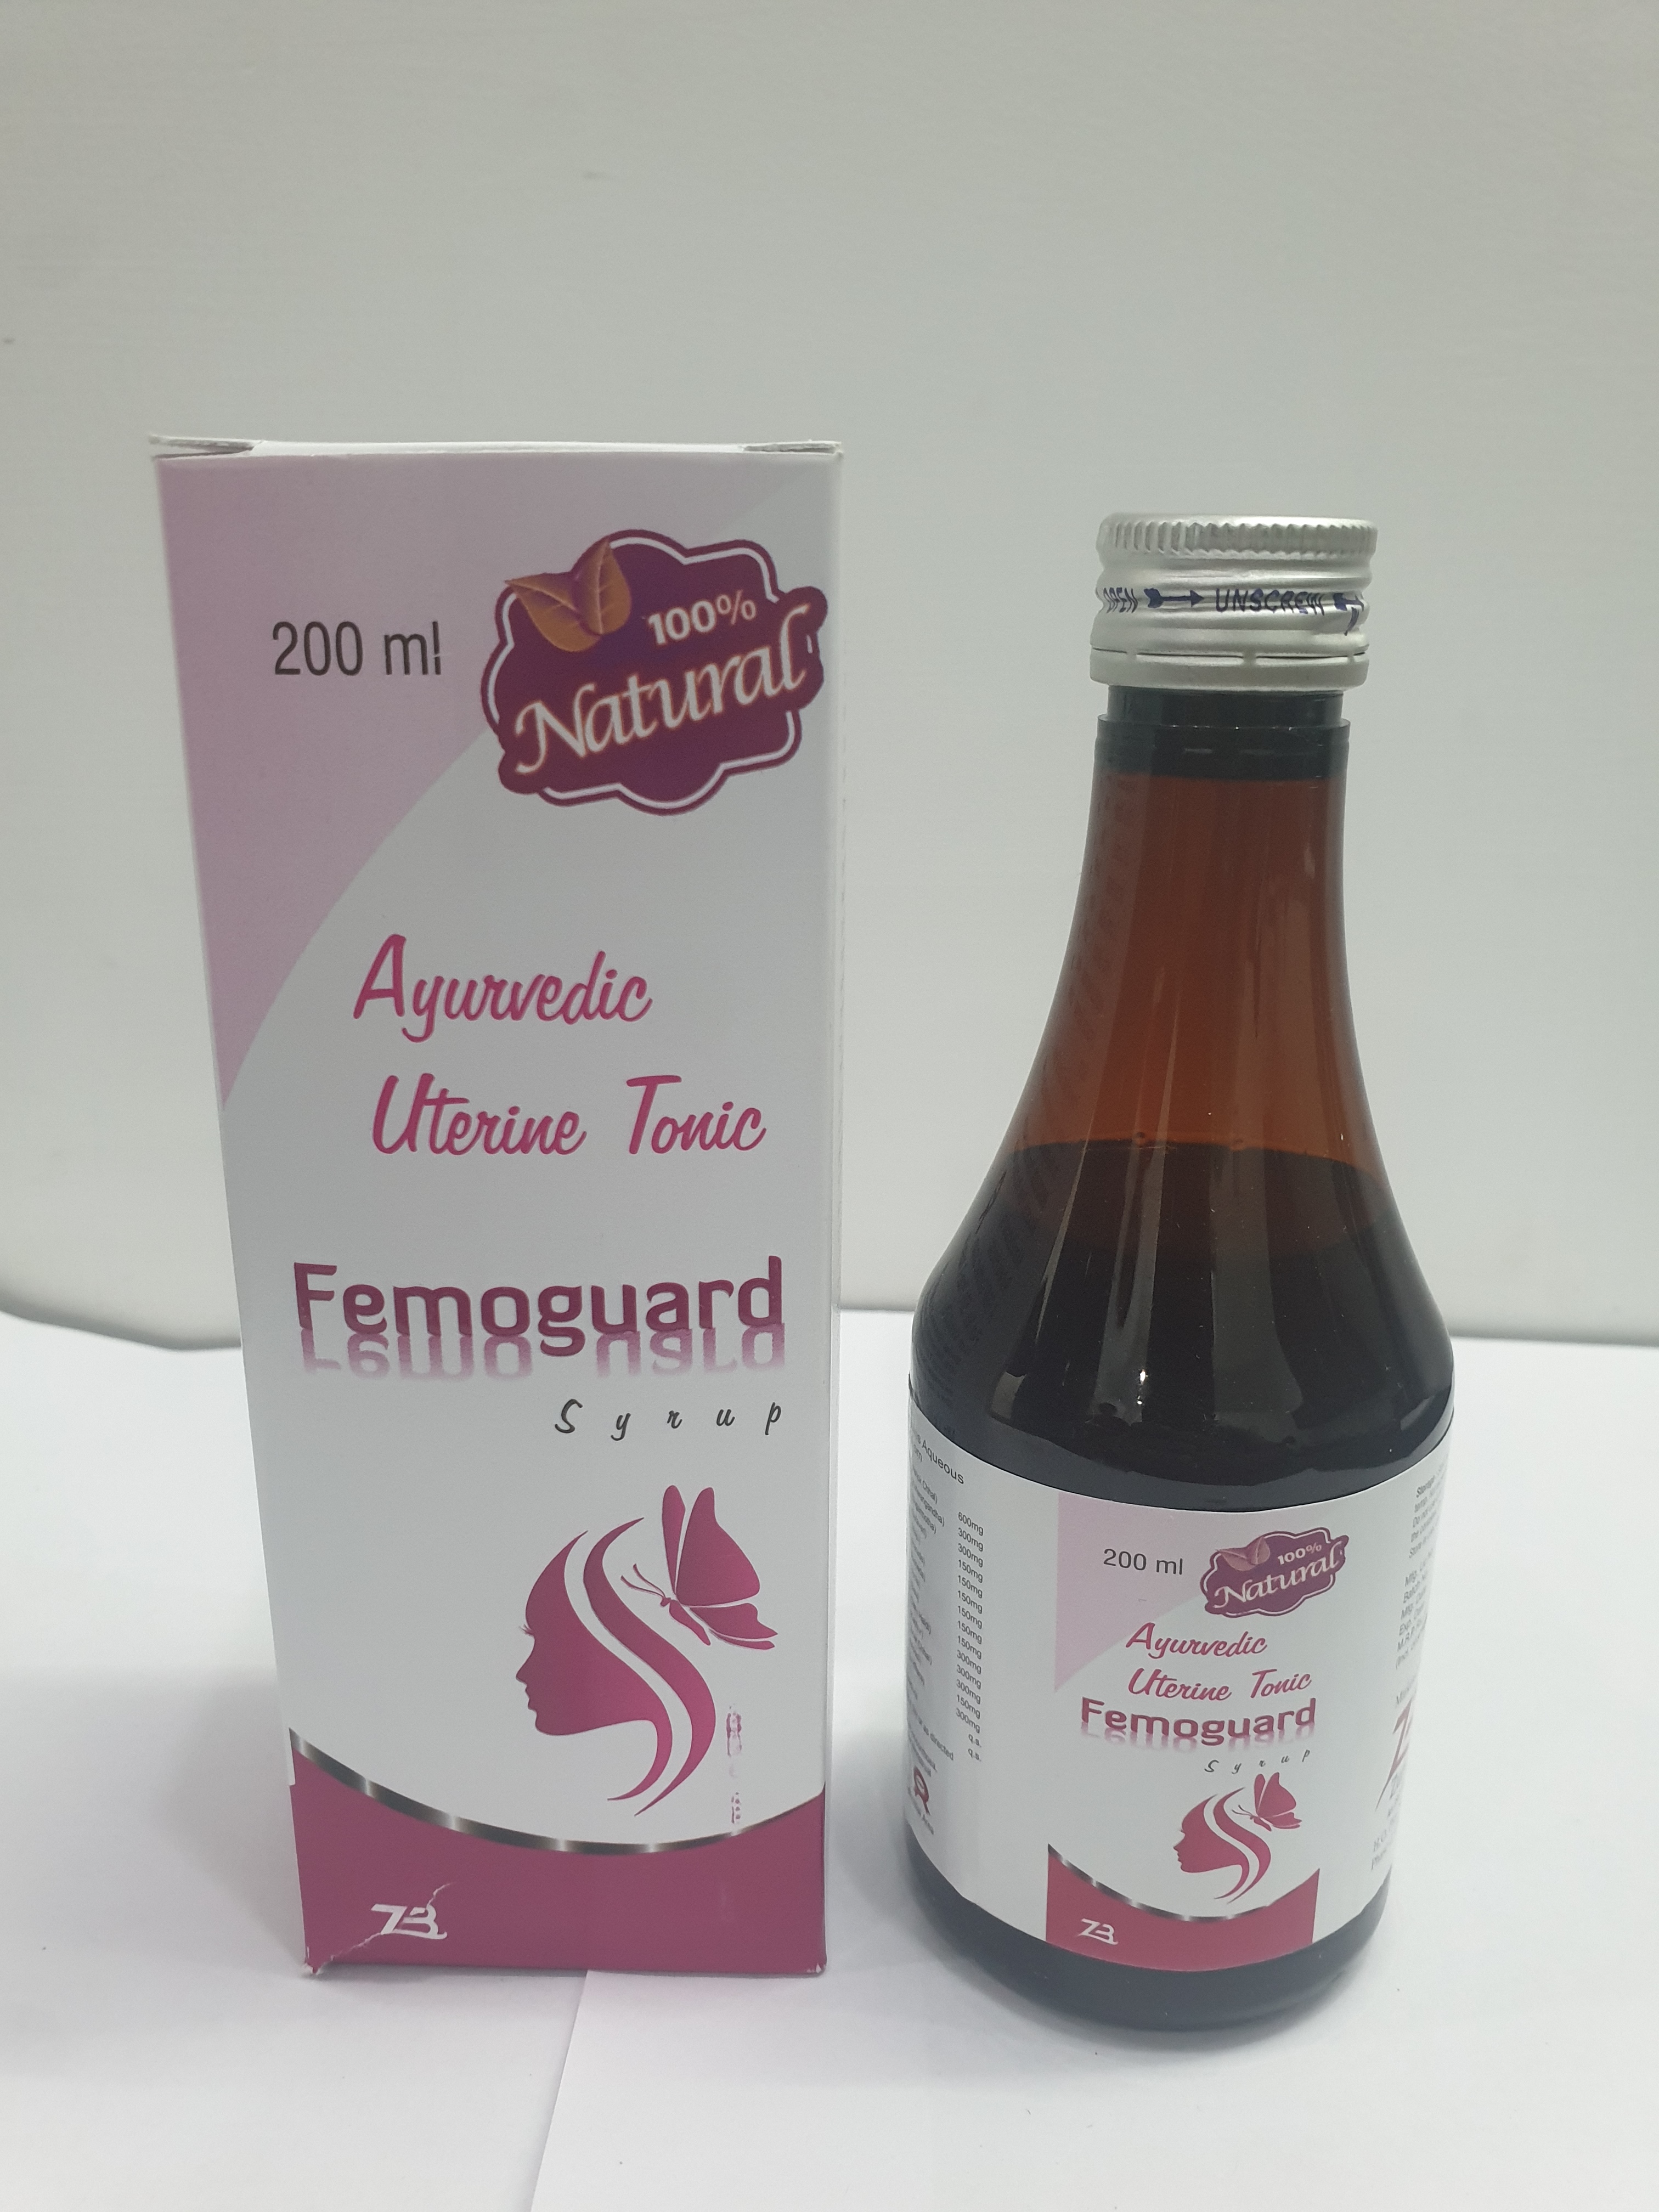 Product Name: Femoguard, Compositions of Aurvedic Uterine Tonic  are Aurvedic Uterine Tonic  - Zumax Biocare